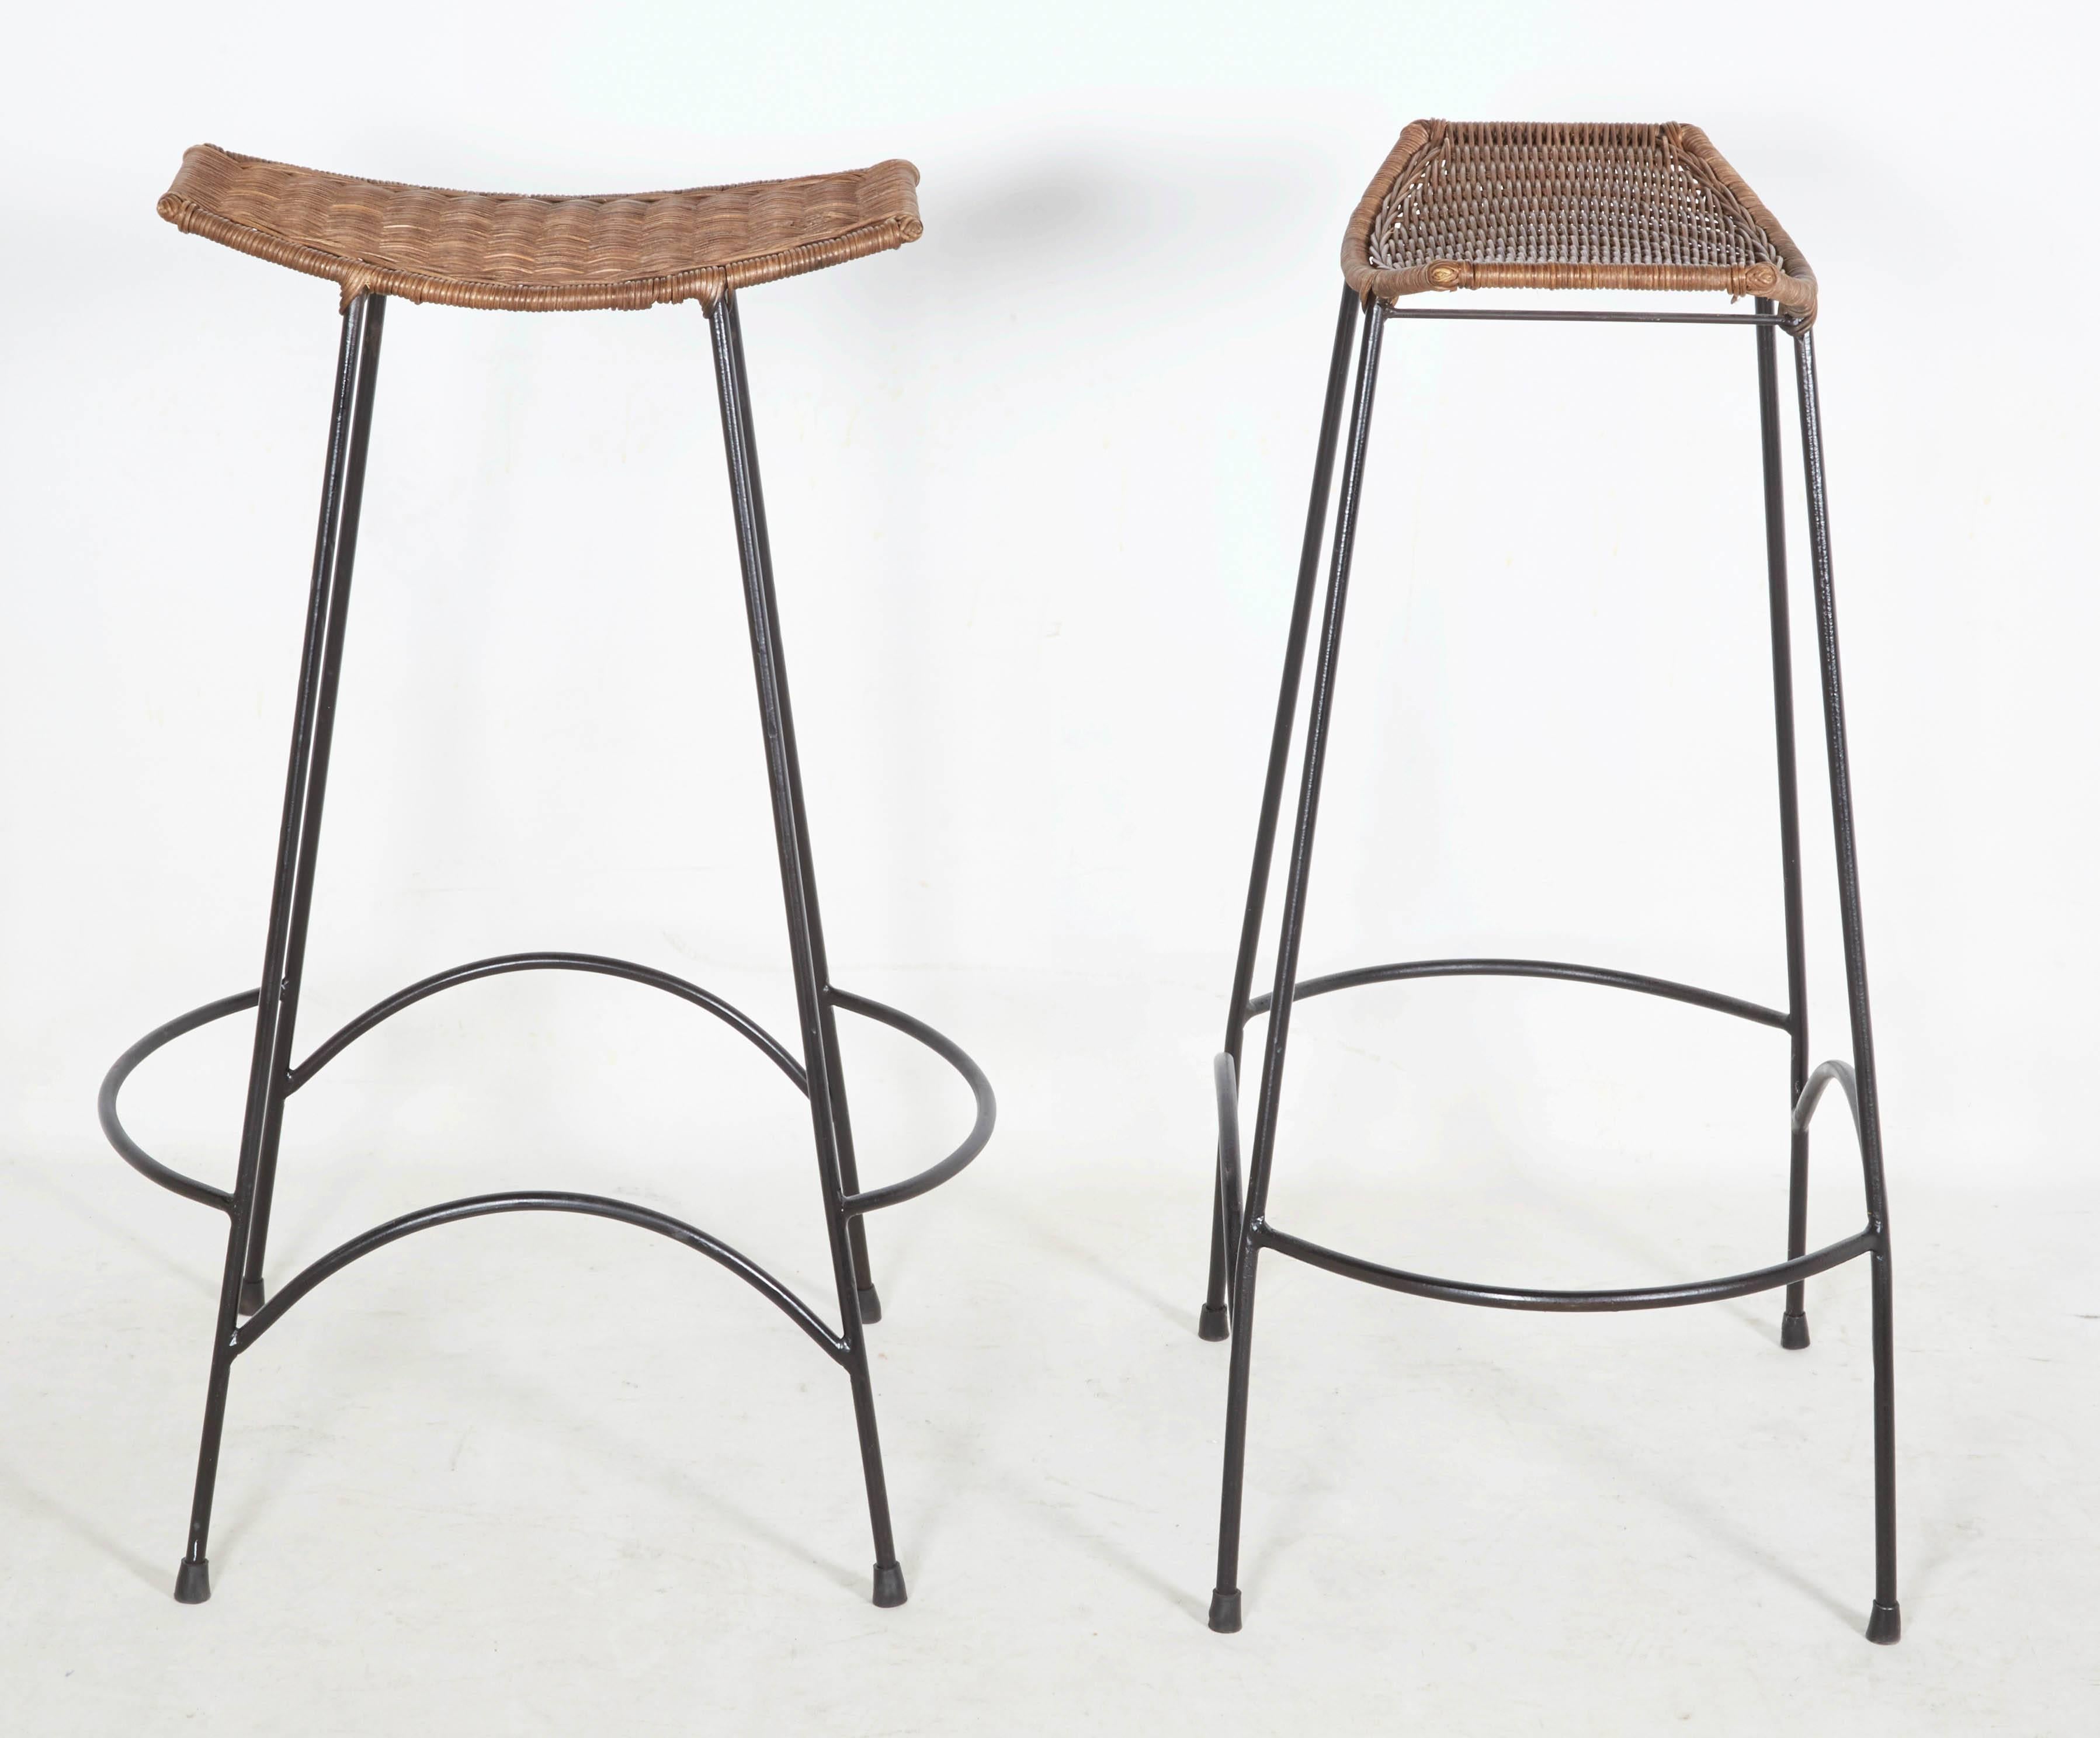 Charming pair of wrought iron stools with woven rattan seats. The stools are stackable. Please contact for location. 